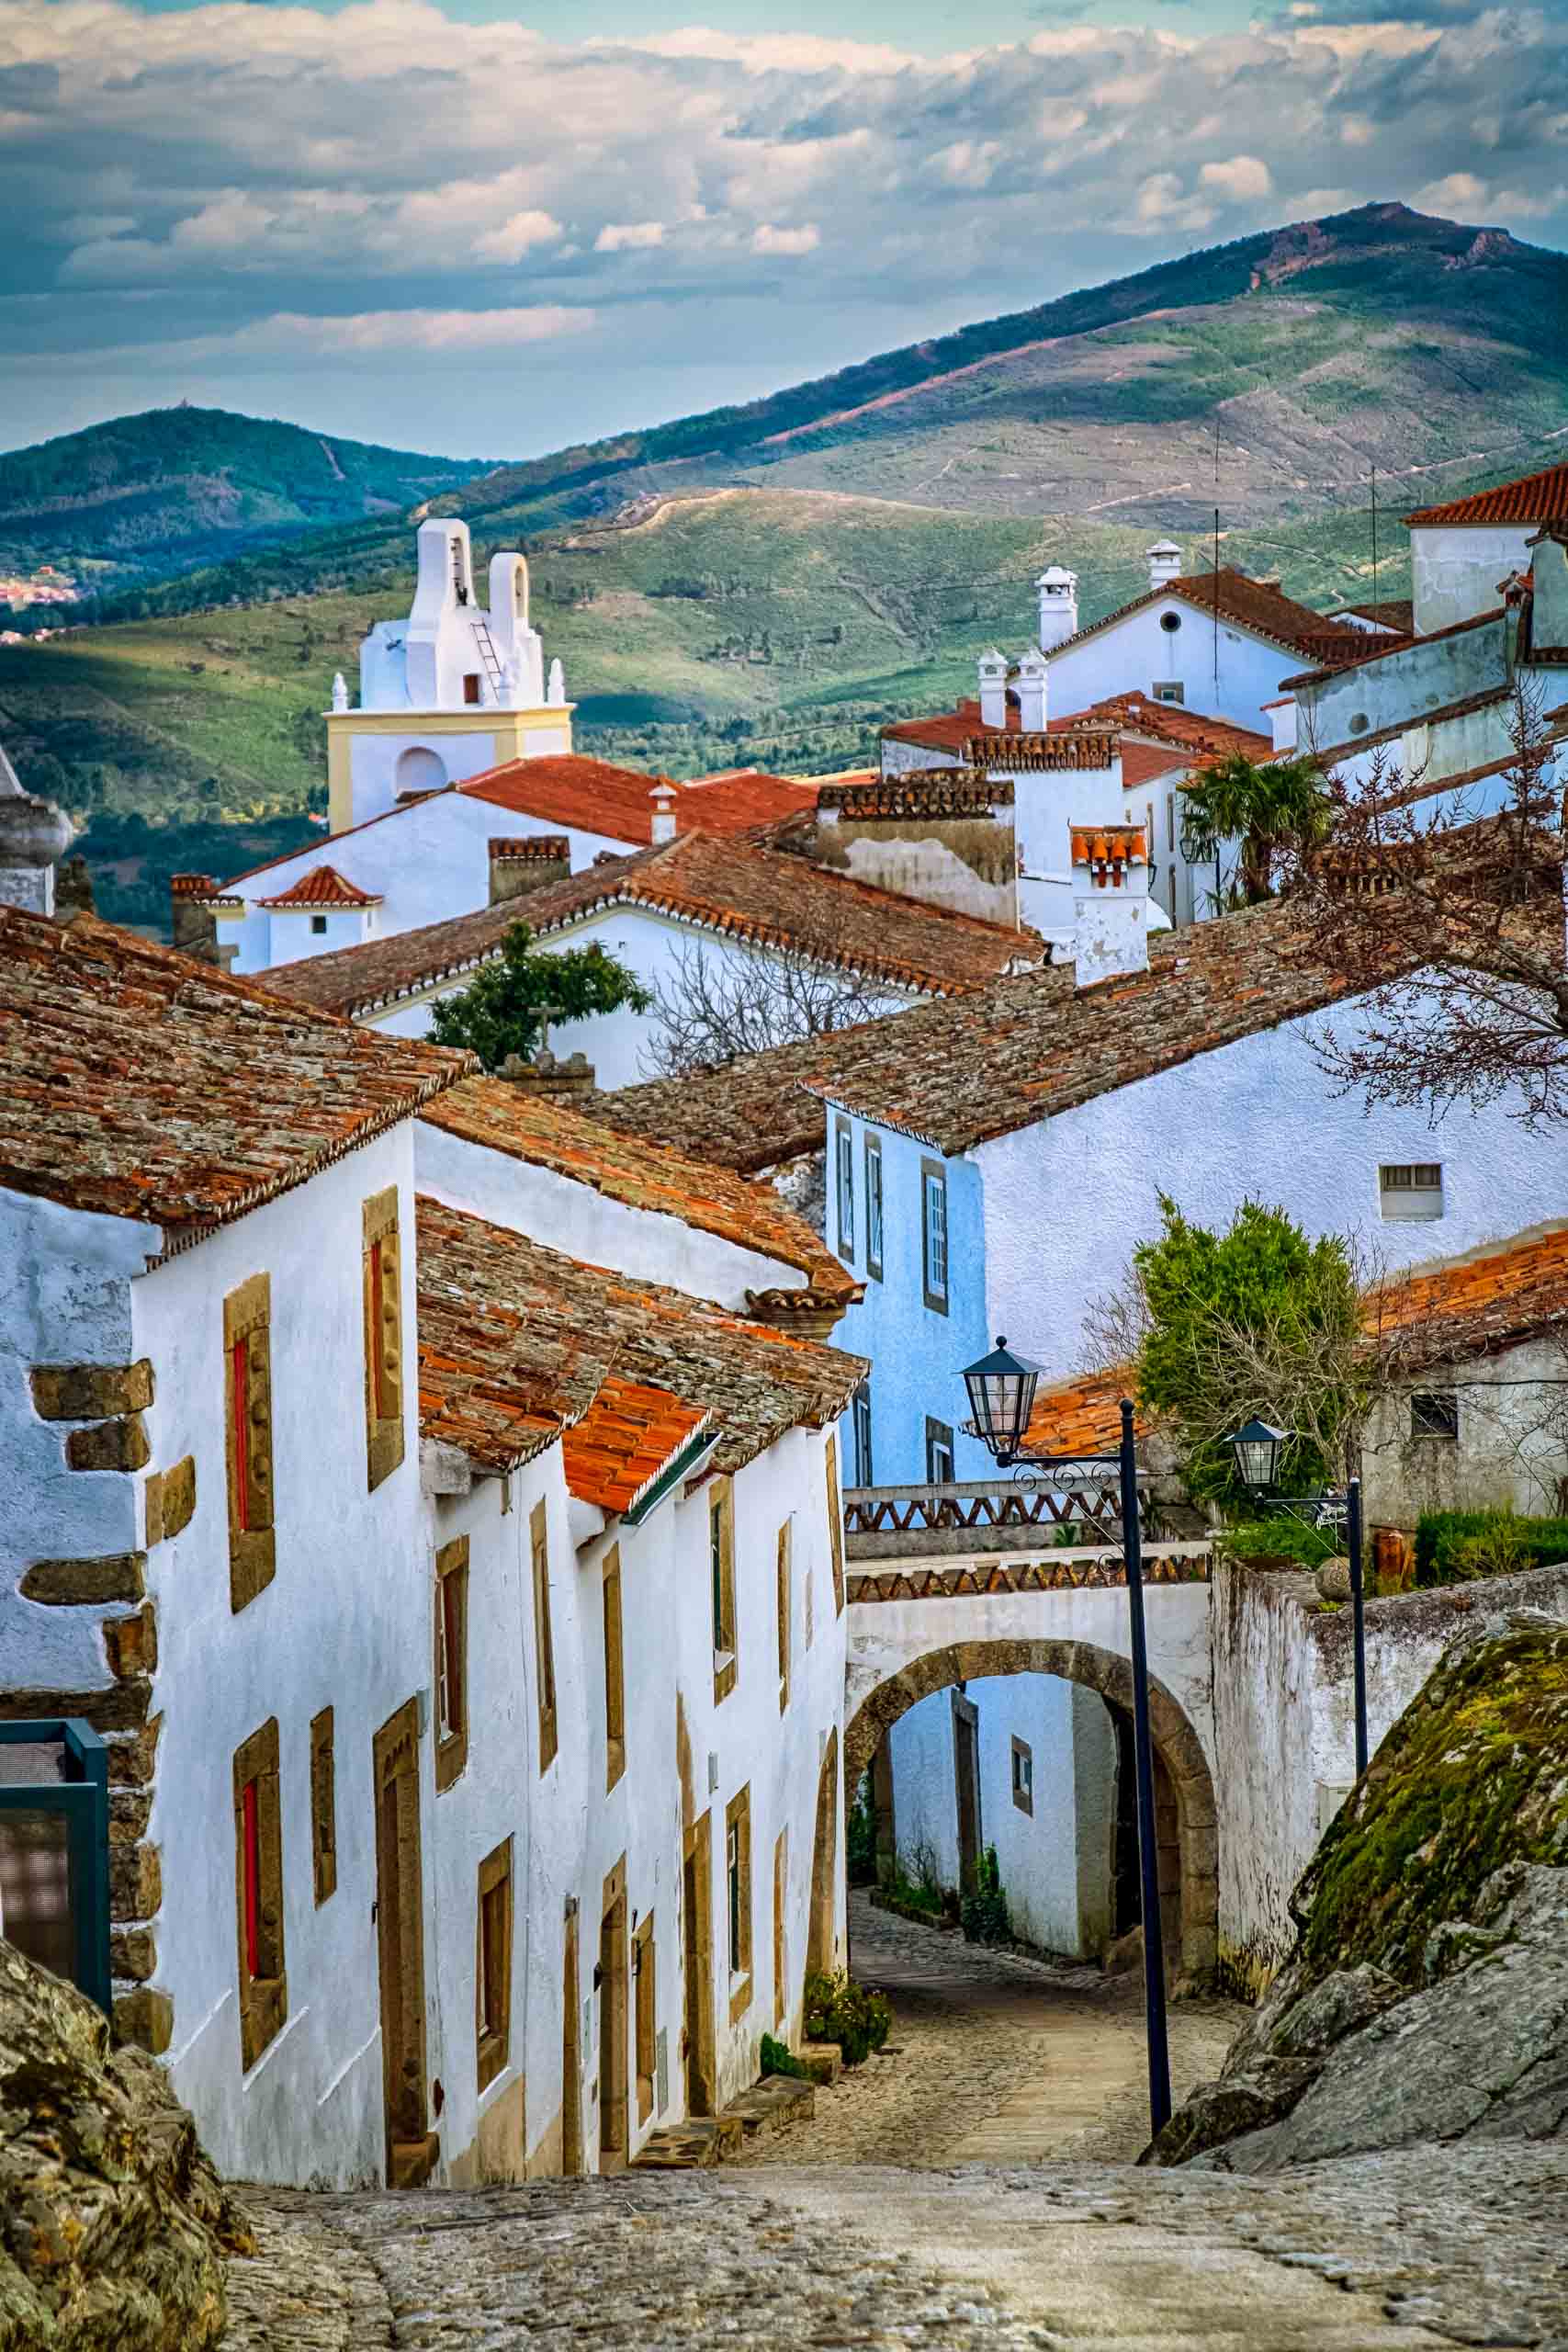 Old white houses on a street in Portugal.